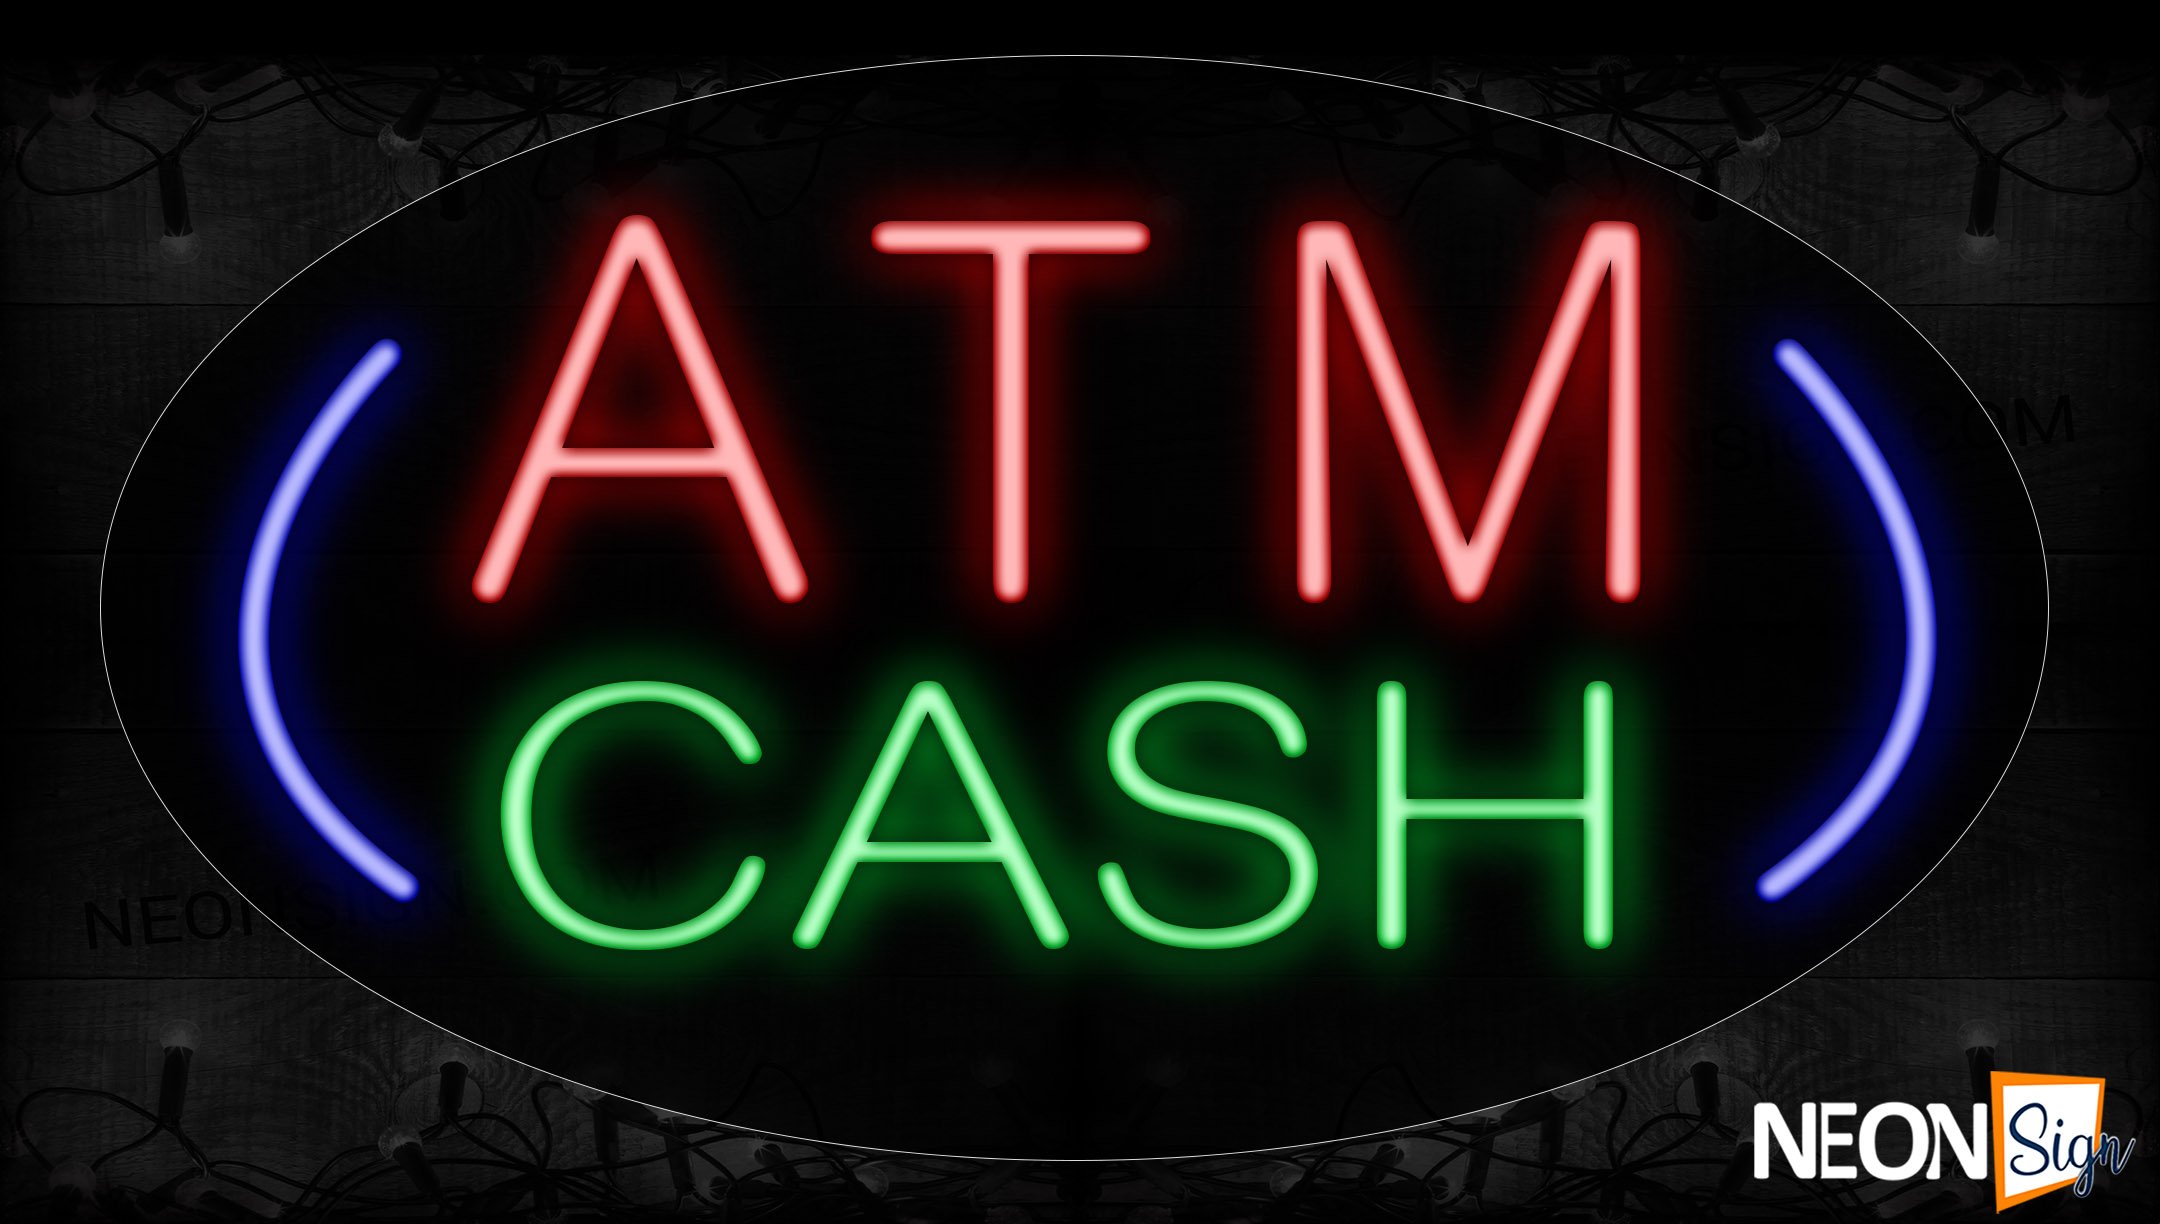 Image of 14141 Atm Cash With Curve Line Neon Signs_17x30 Contoured Black Backing